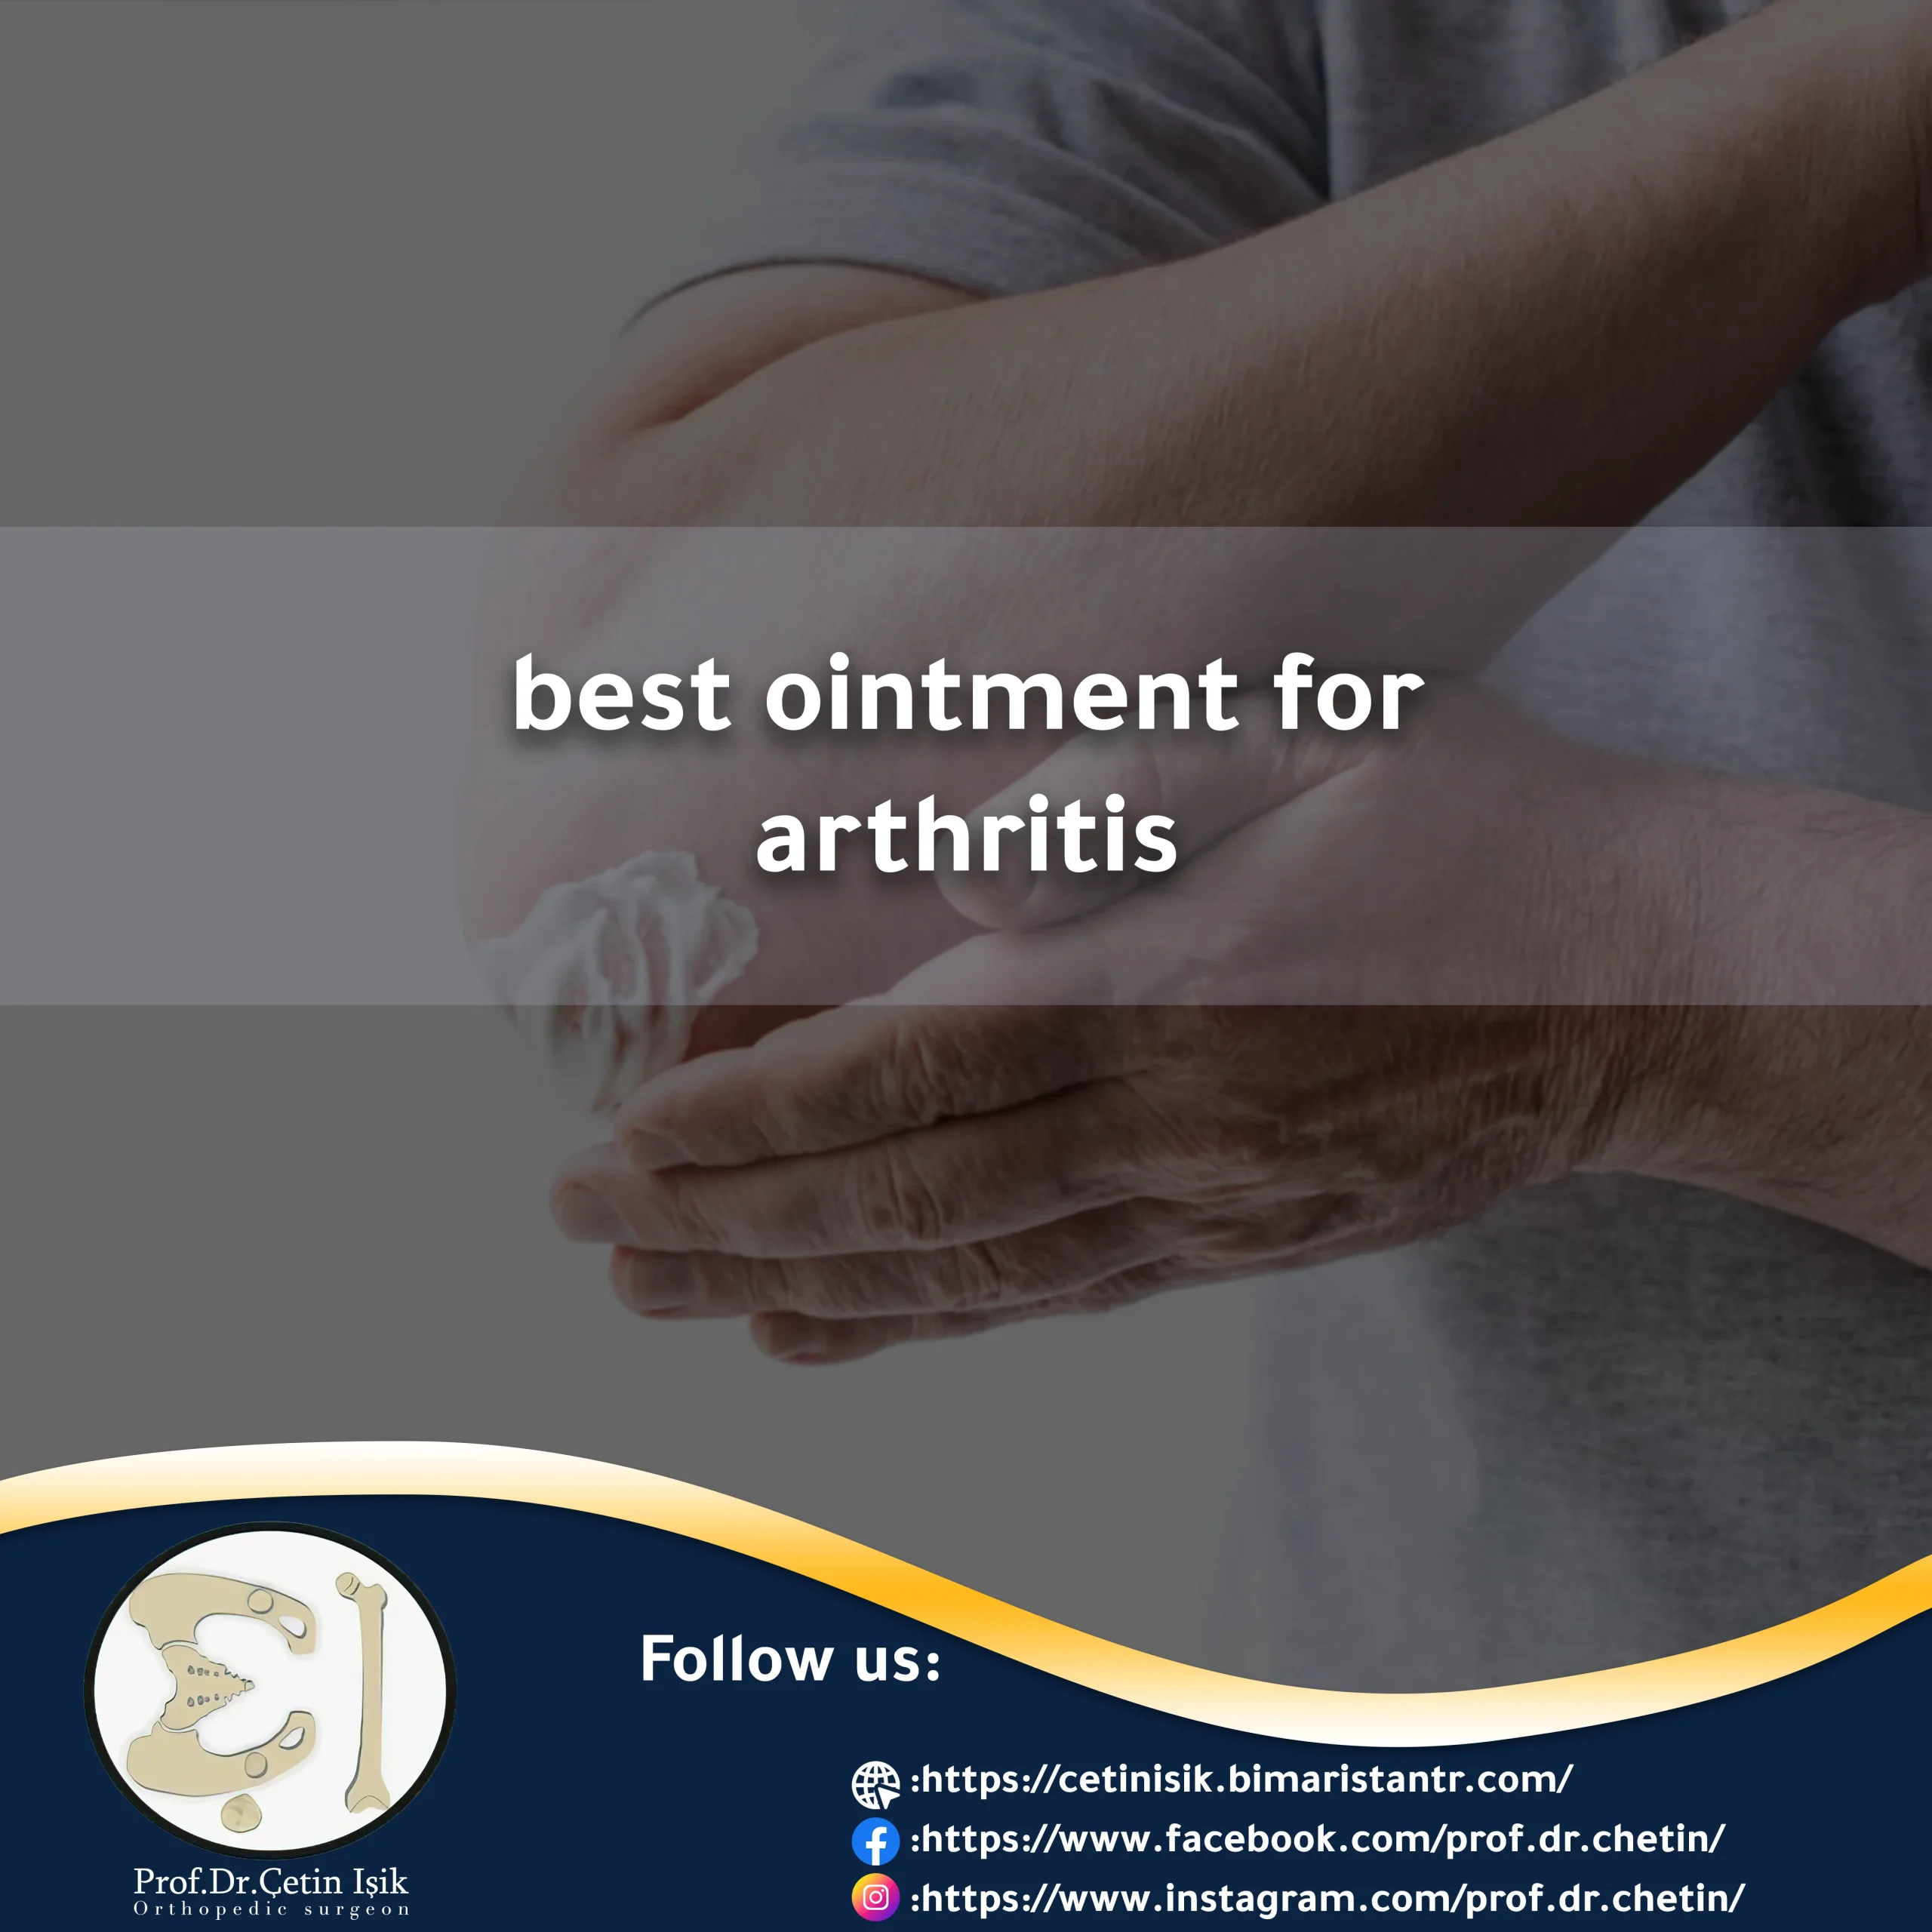 The Best Ointment for Arthritis You Can Use